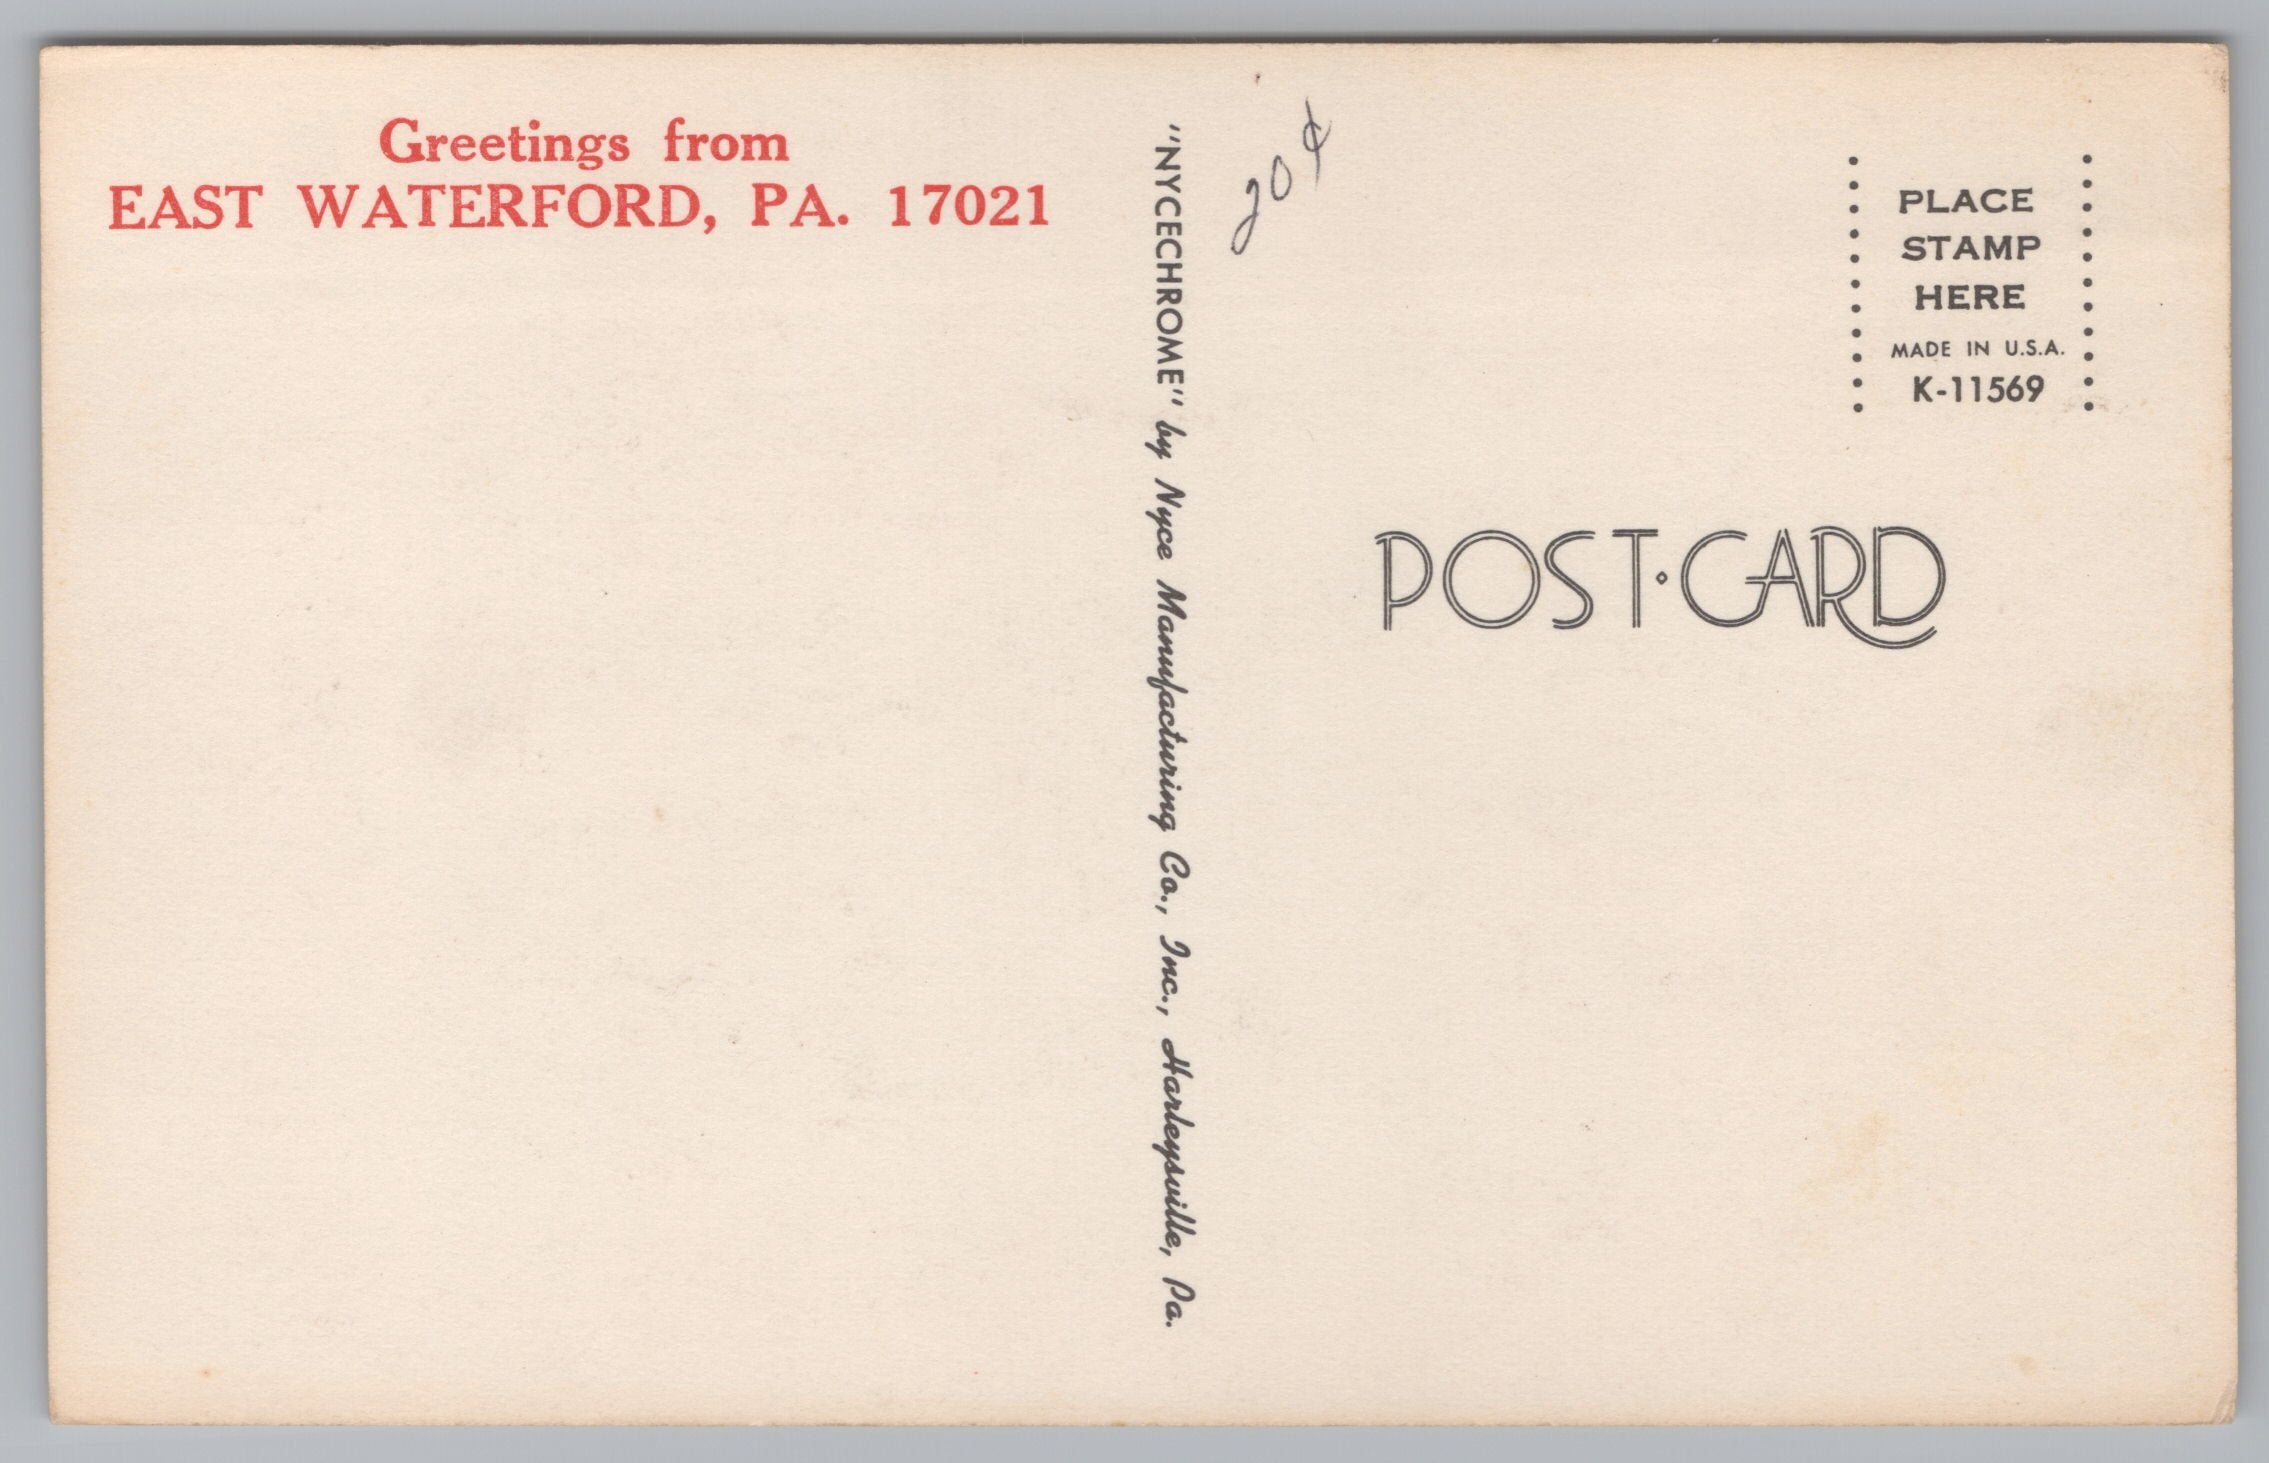 Greeting Card From East Waterford, Pennsylvania, USA, Vintage Post Card